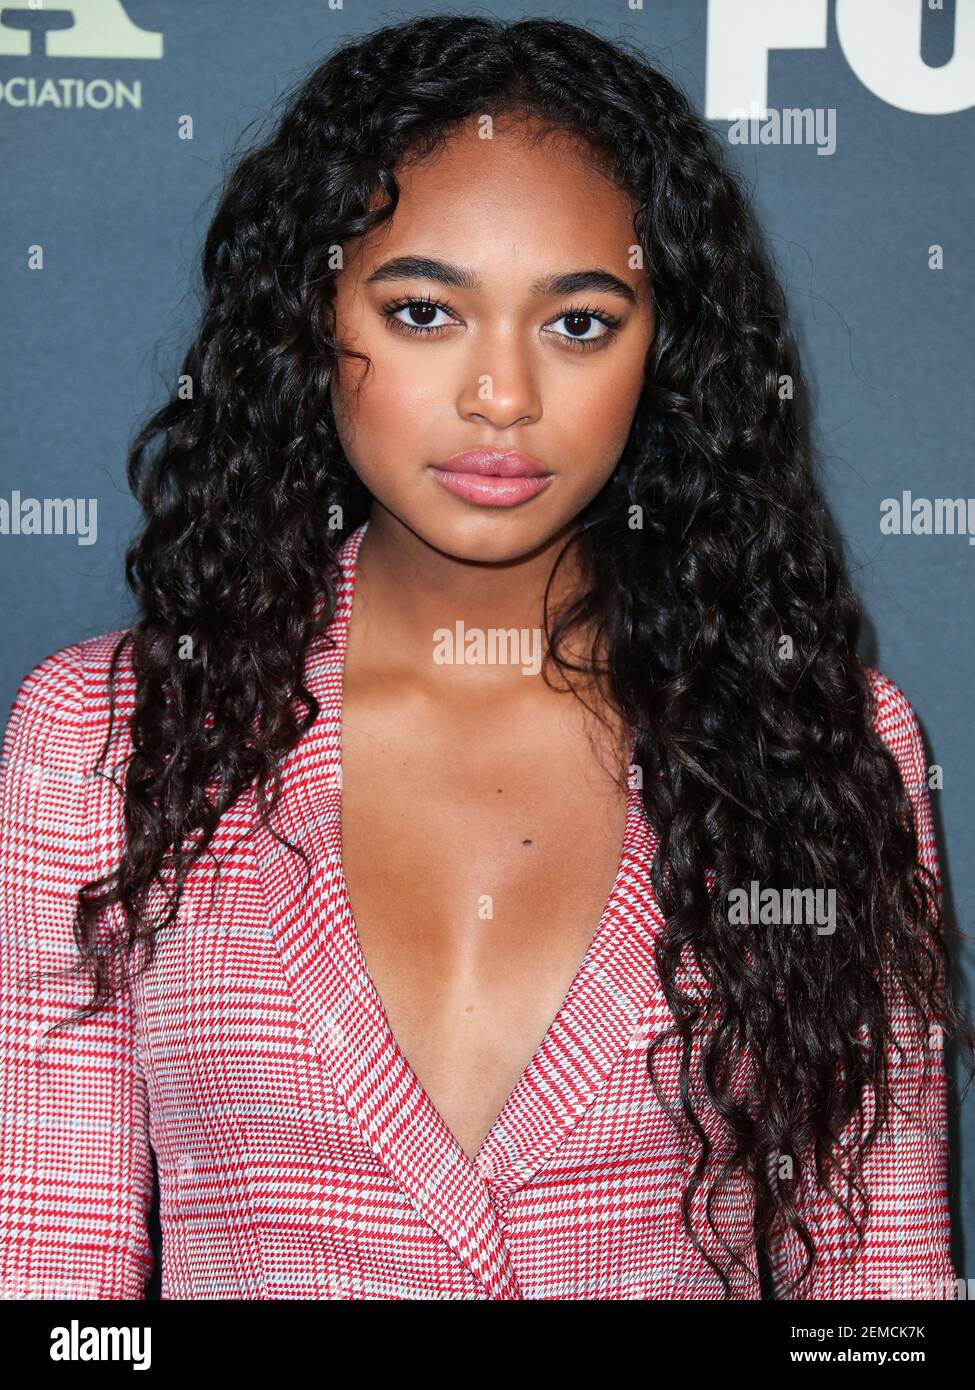 PASADENA, LOS ANGELES, CA, USA - FEBRUARY 06: Actress Chandler Kinney arrives at the FOX Winter TCA 2019 All-Star Party held at The Fig House on February 6, 2019 in Pasadena, Los Angeles, California, United States. (Photo by Xavier Collin/Image Press Agency/Sipa USA) Stock Photo